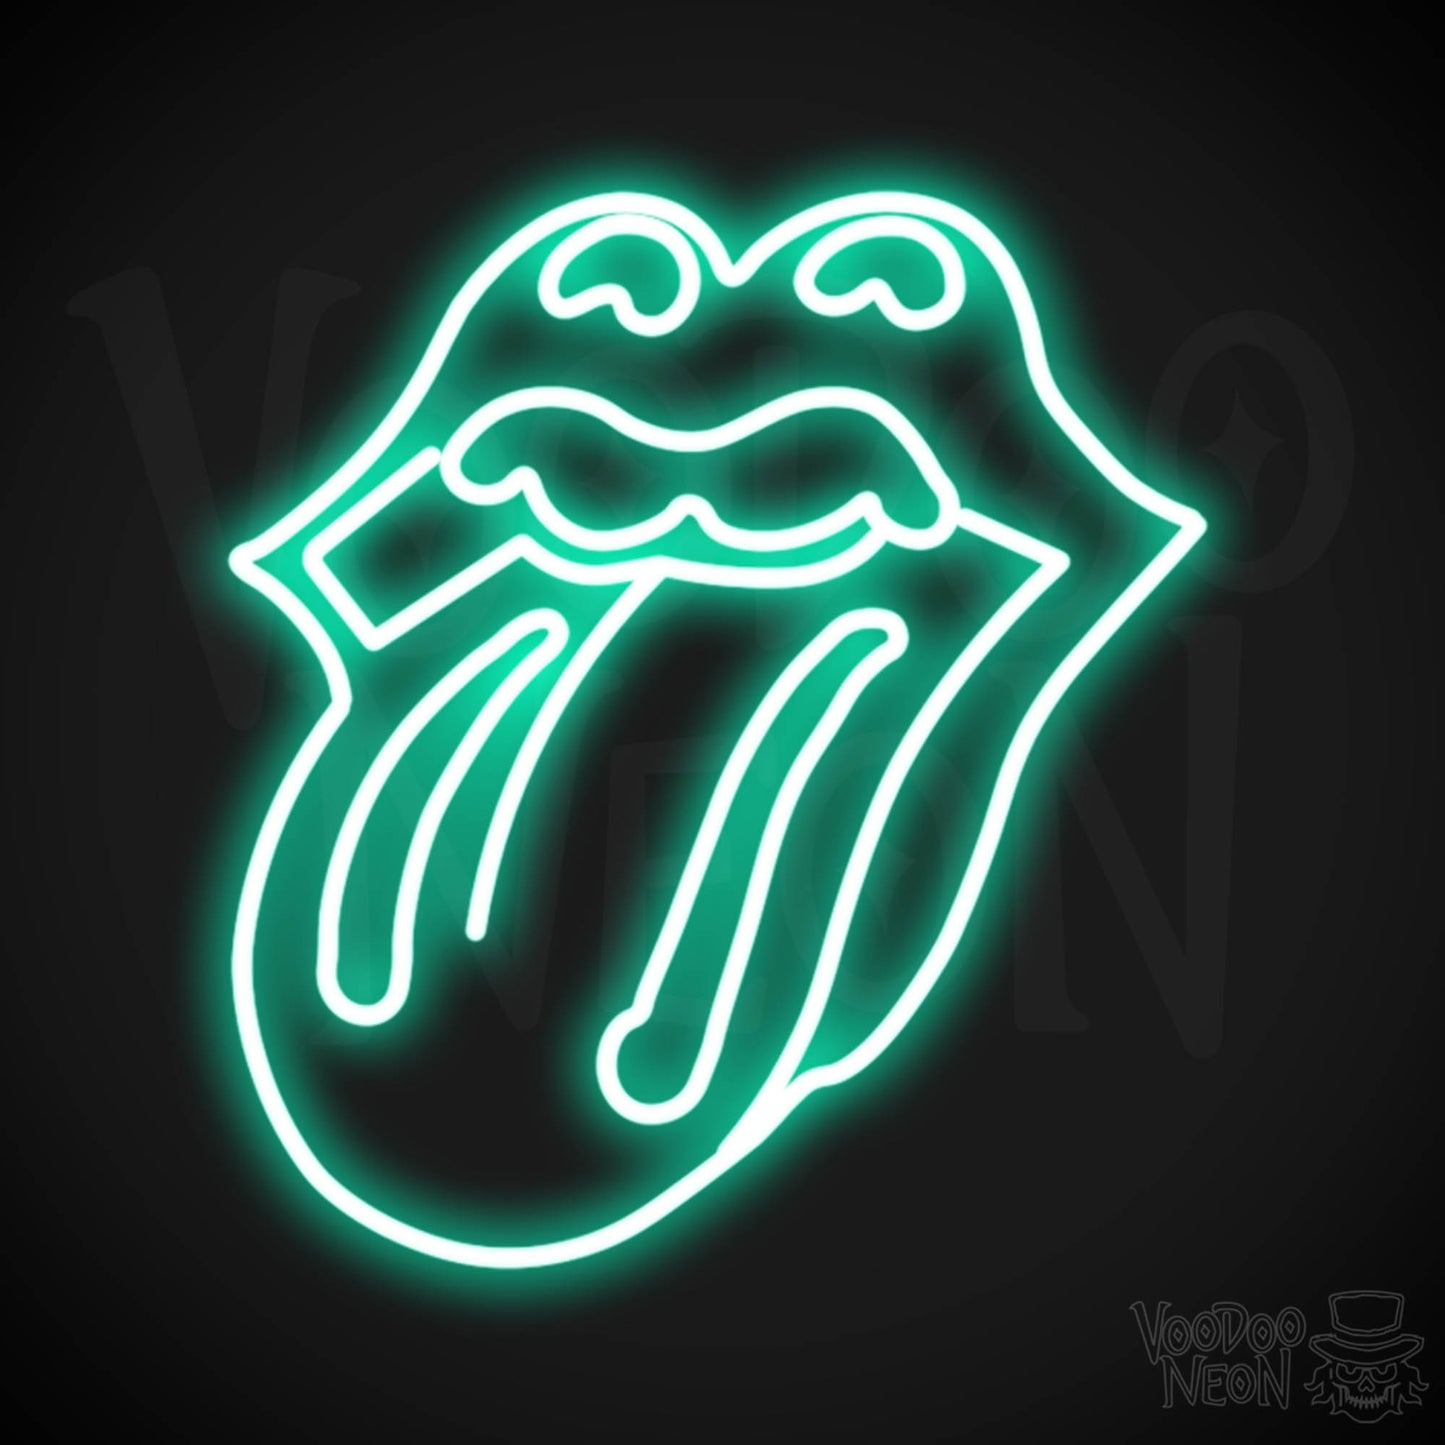 Rolling Stones Neon Sign - Rolling Stones Sign - Neon Rolling Stones Logo Wall Art - Color Light Green